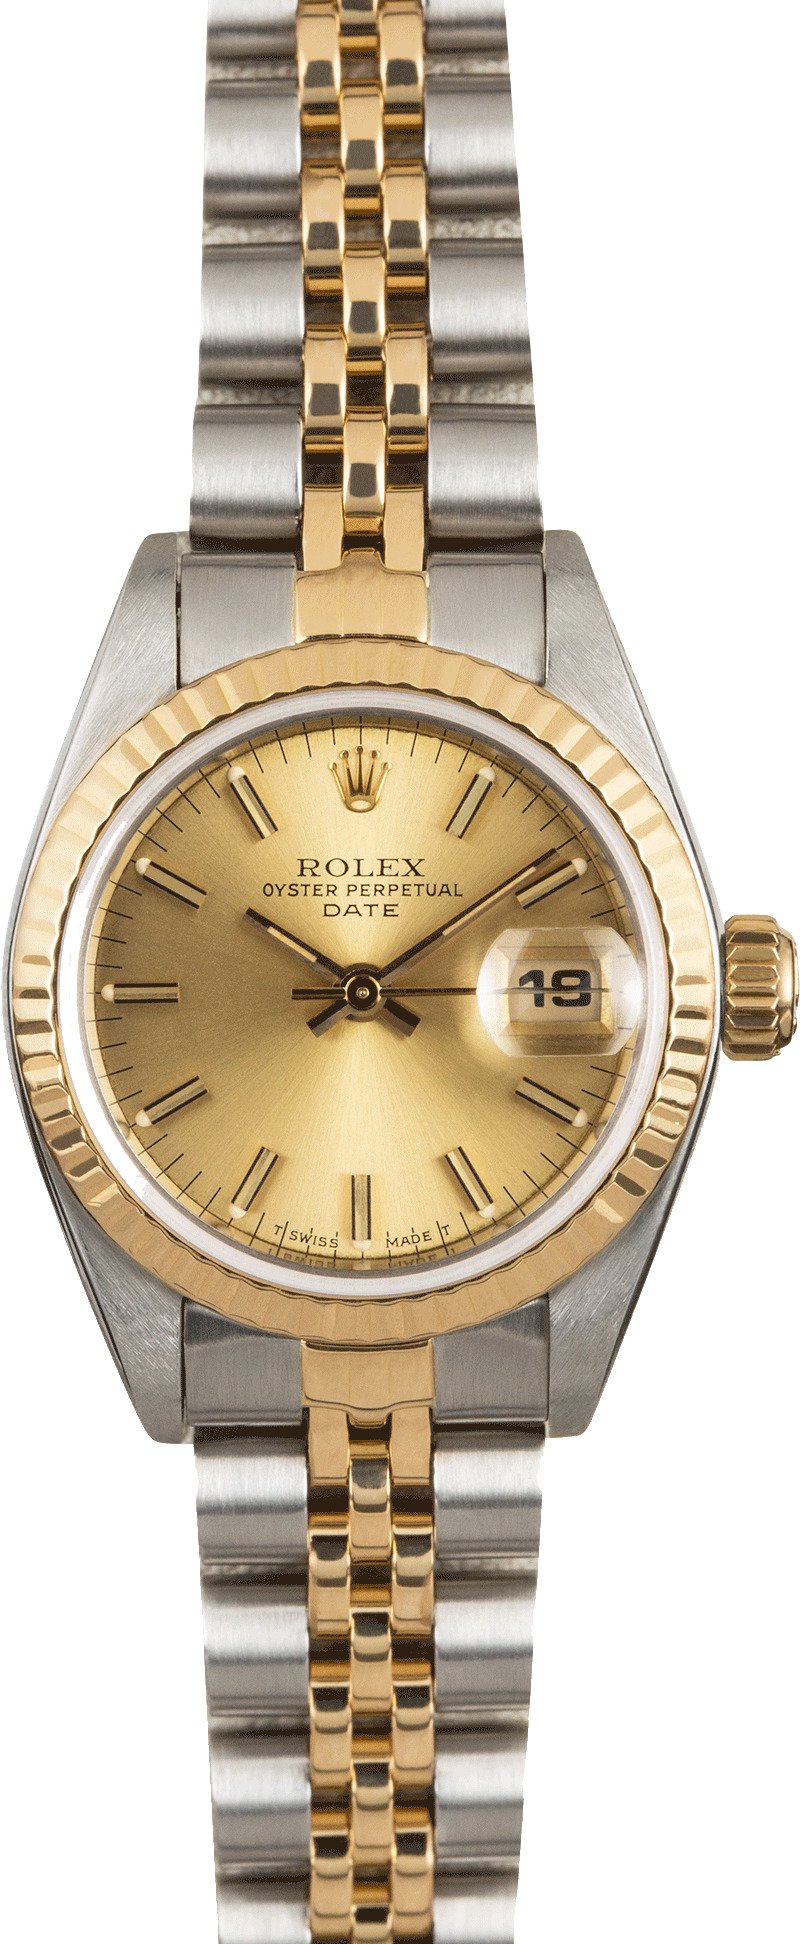 Rolex Datejust 69173 Two Tone Jubilee Band